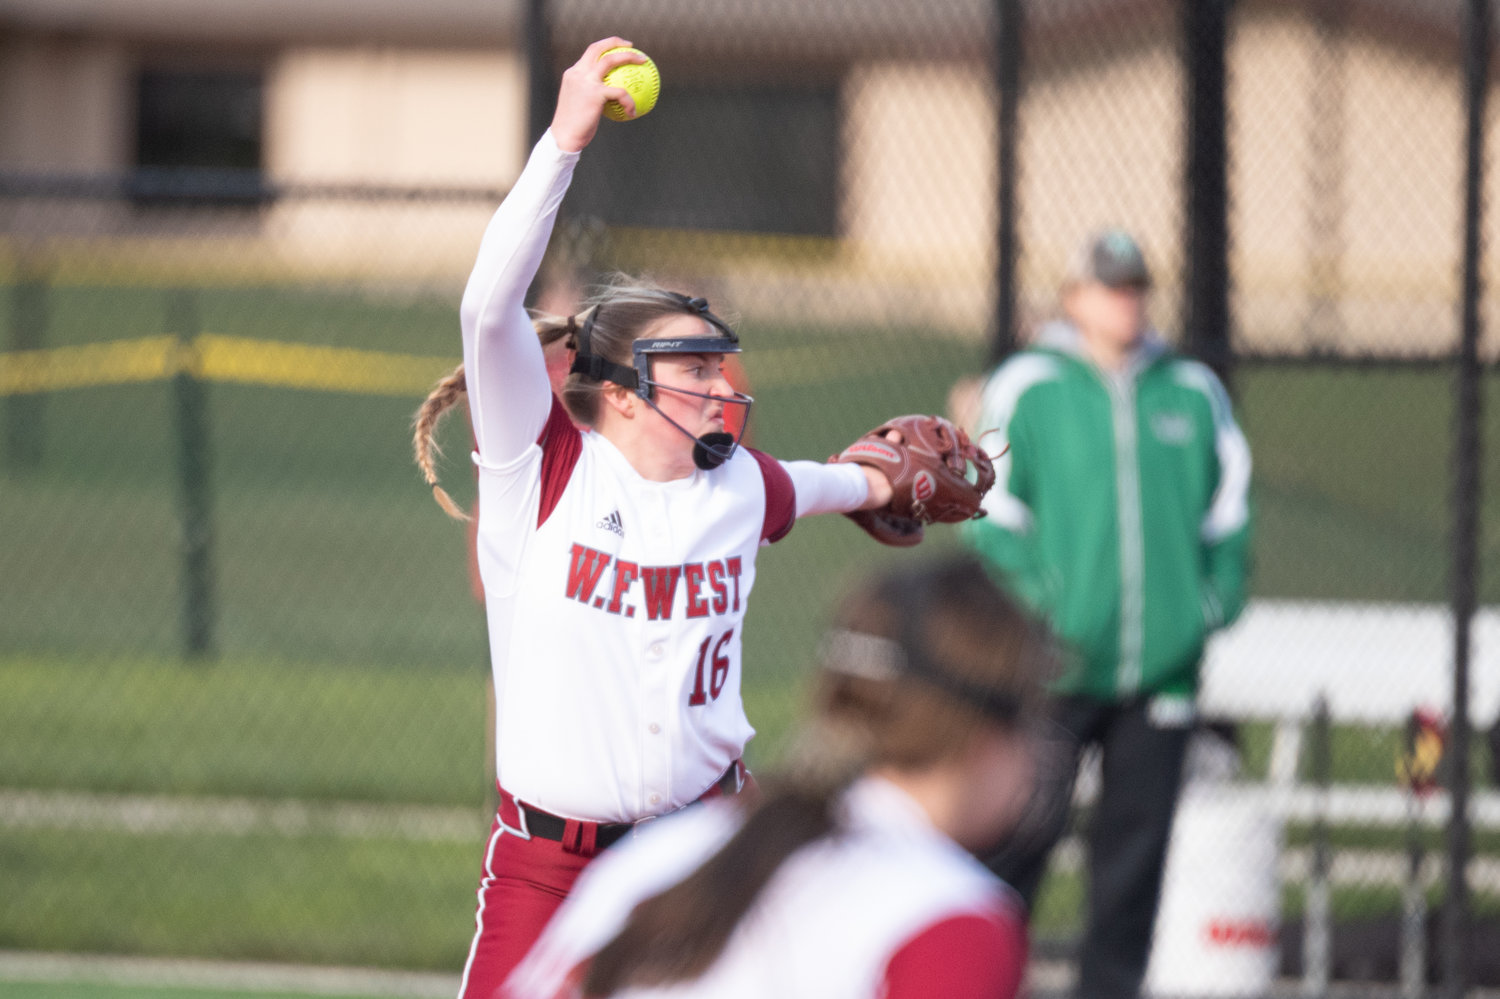 W.F. West senior Kamy Dacus sends a pitch off against Tumwater at Recreation Park in Chehalis April 15.